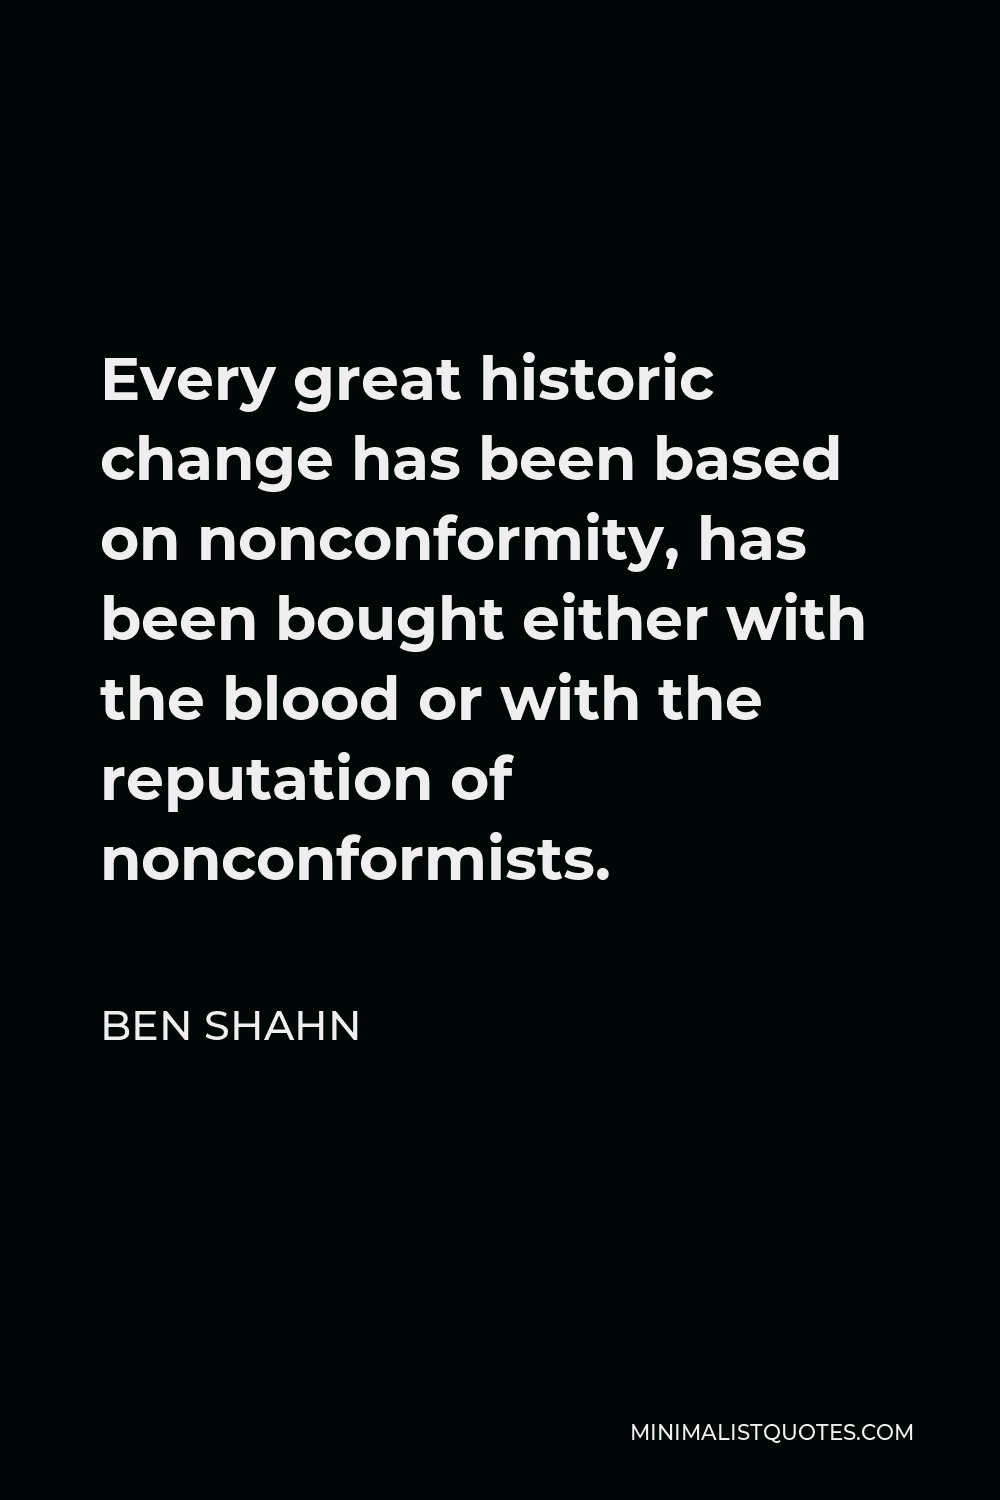 Ben Shahn Quote - Every great historic change has been based on nonconformity, has been bought either with the blood or with the reputation of nonconformists.